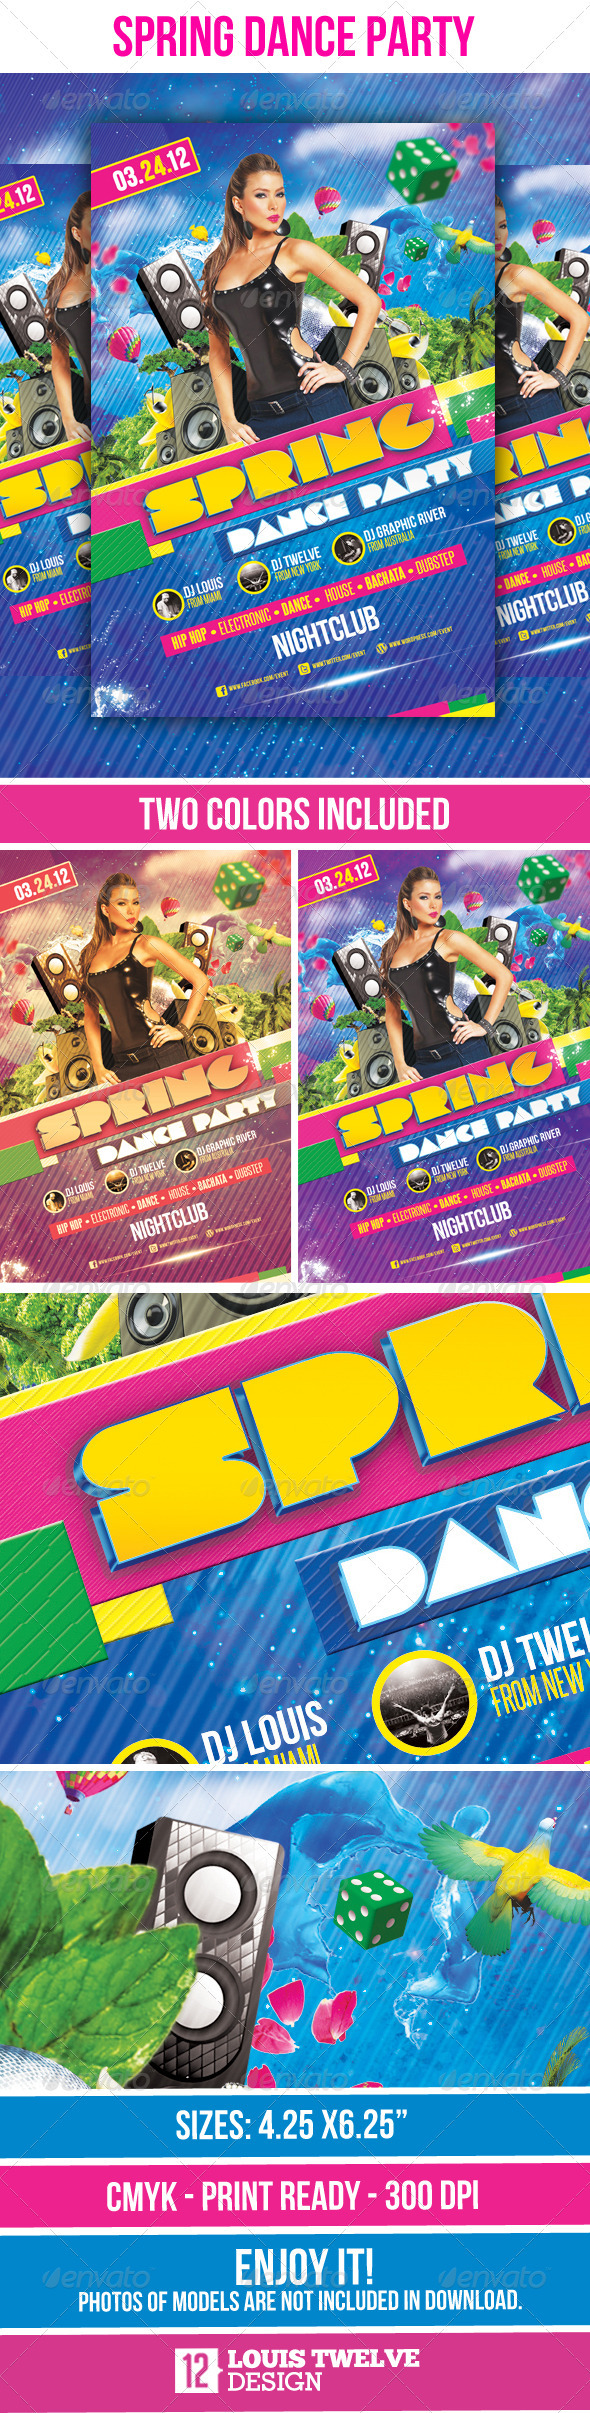 Spring Dance Party - Flyer Template